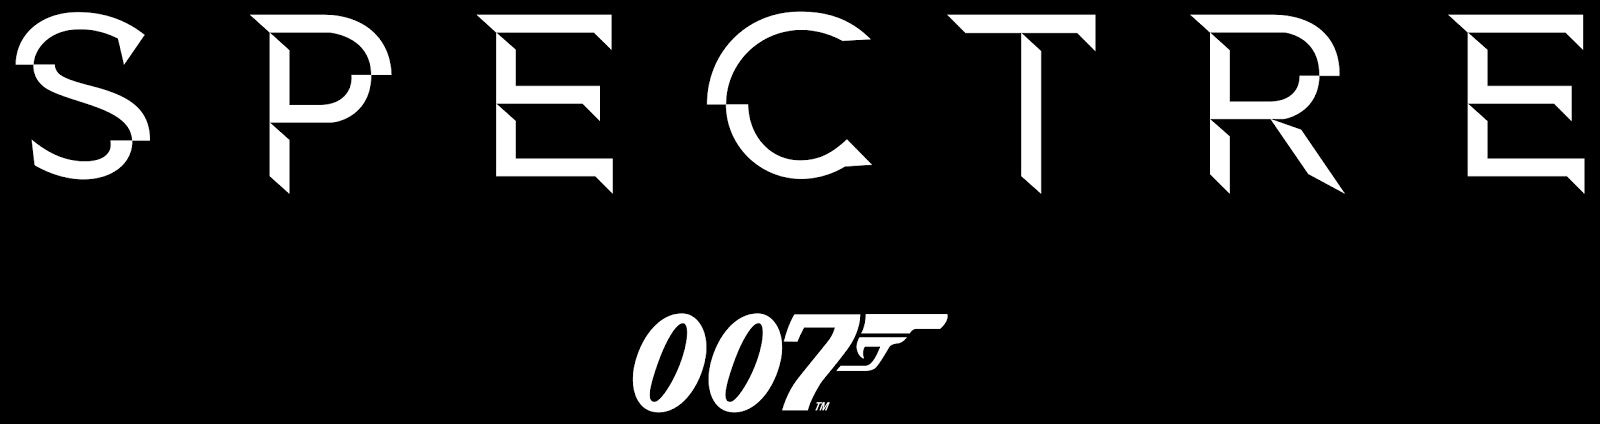 all-the-bond-24-spectre-details-announced-here-are-you-ready-for-james-bond-s-return-in